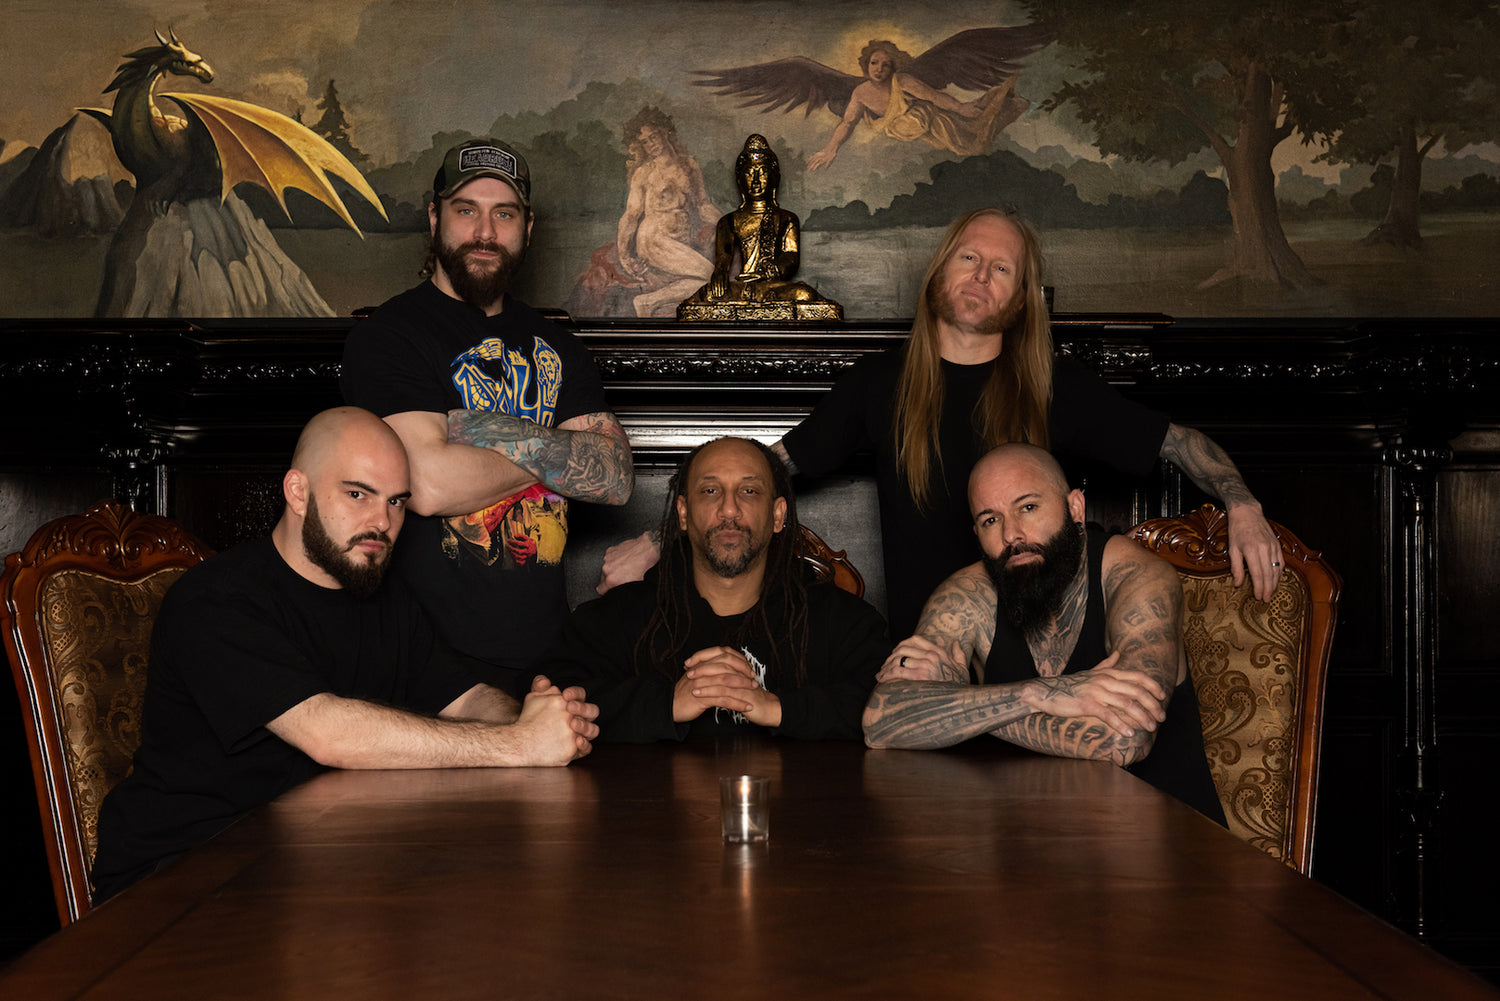 Suffocation Celebrates the Evolution of Extreme Music on 'Hymns of the Apocrypha'